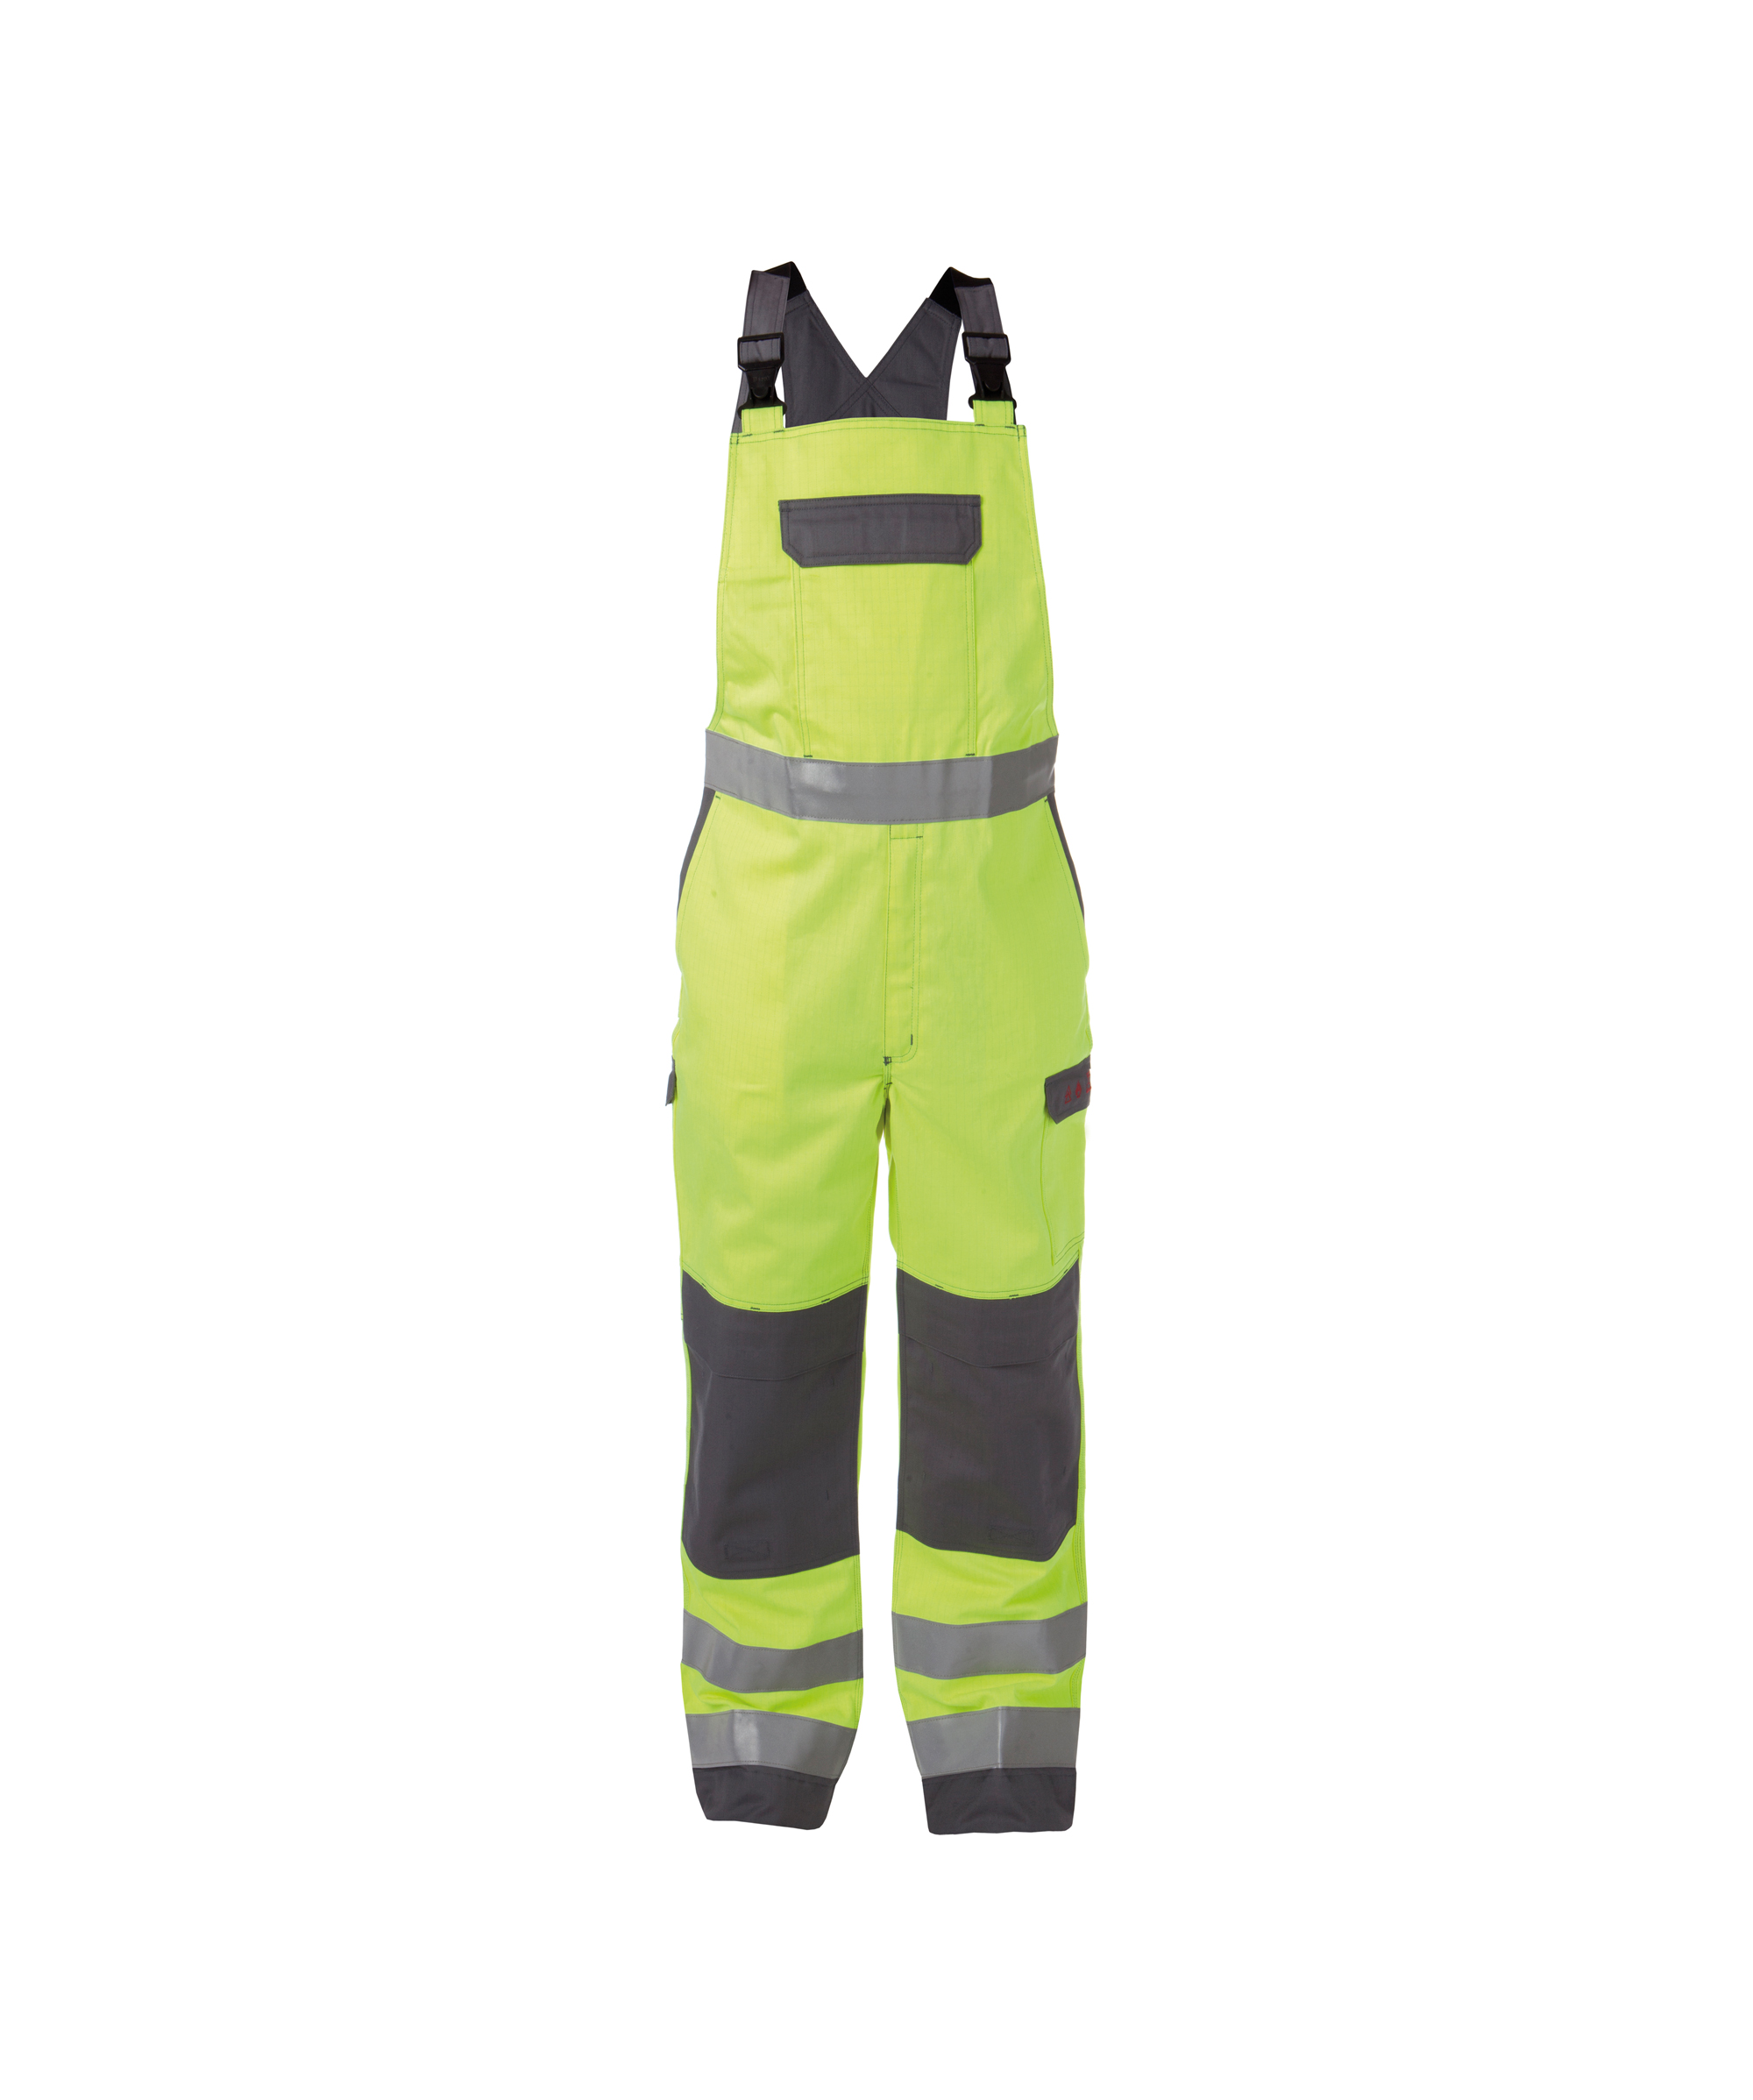 colombia_two-tone-multinorm-high-visibility-brace-overall-with-knee-pockets_fluo-yellow-graphite-grey_front.jpg